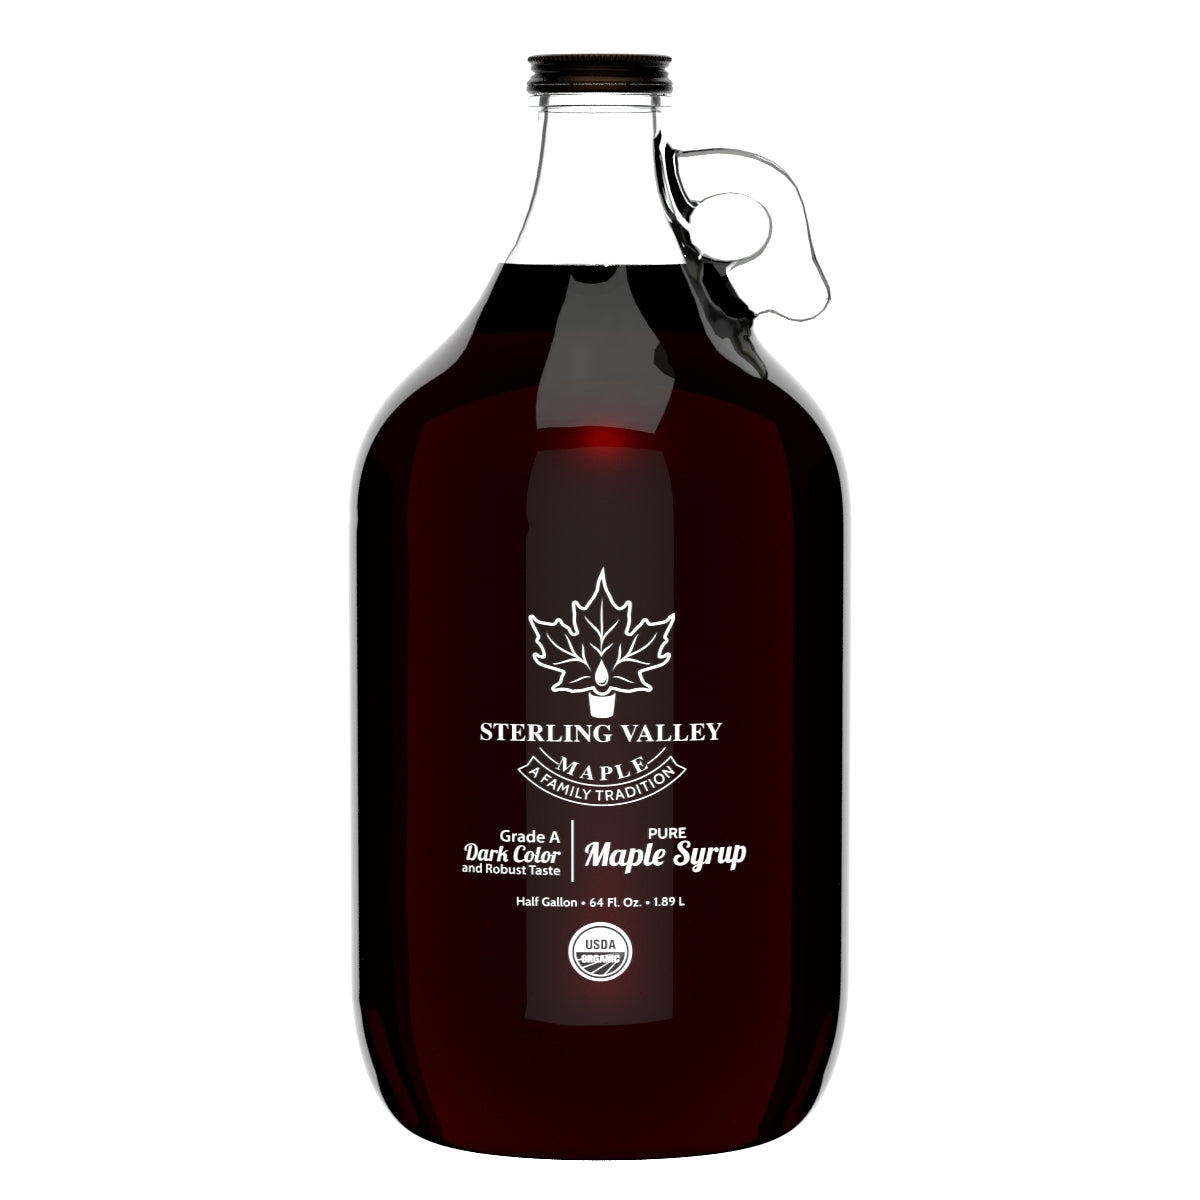 Certified Organic Maple Syrup: Dark Color and Robust Taste – Sterling  Valley Maple